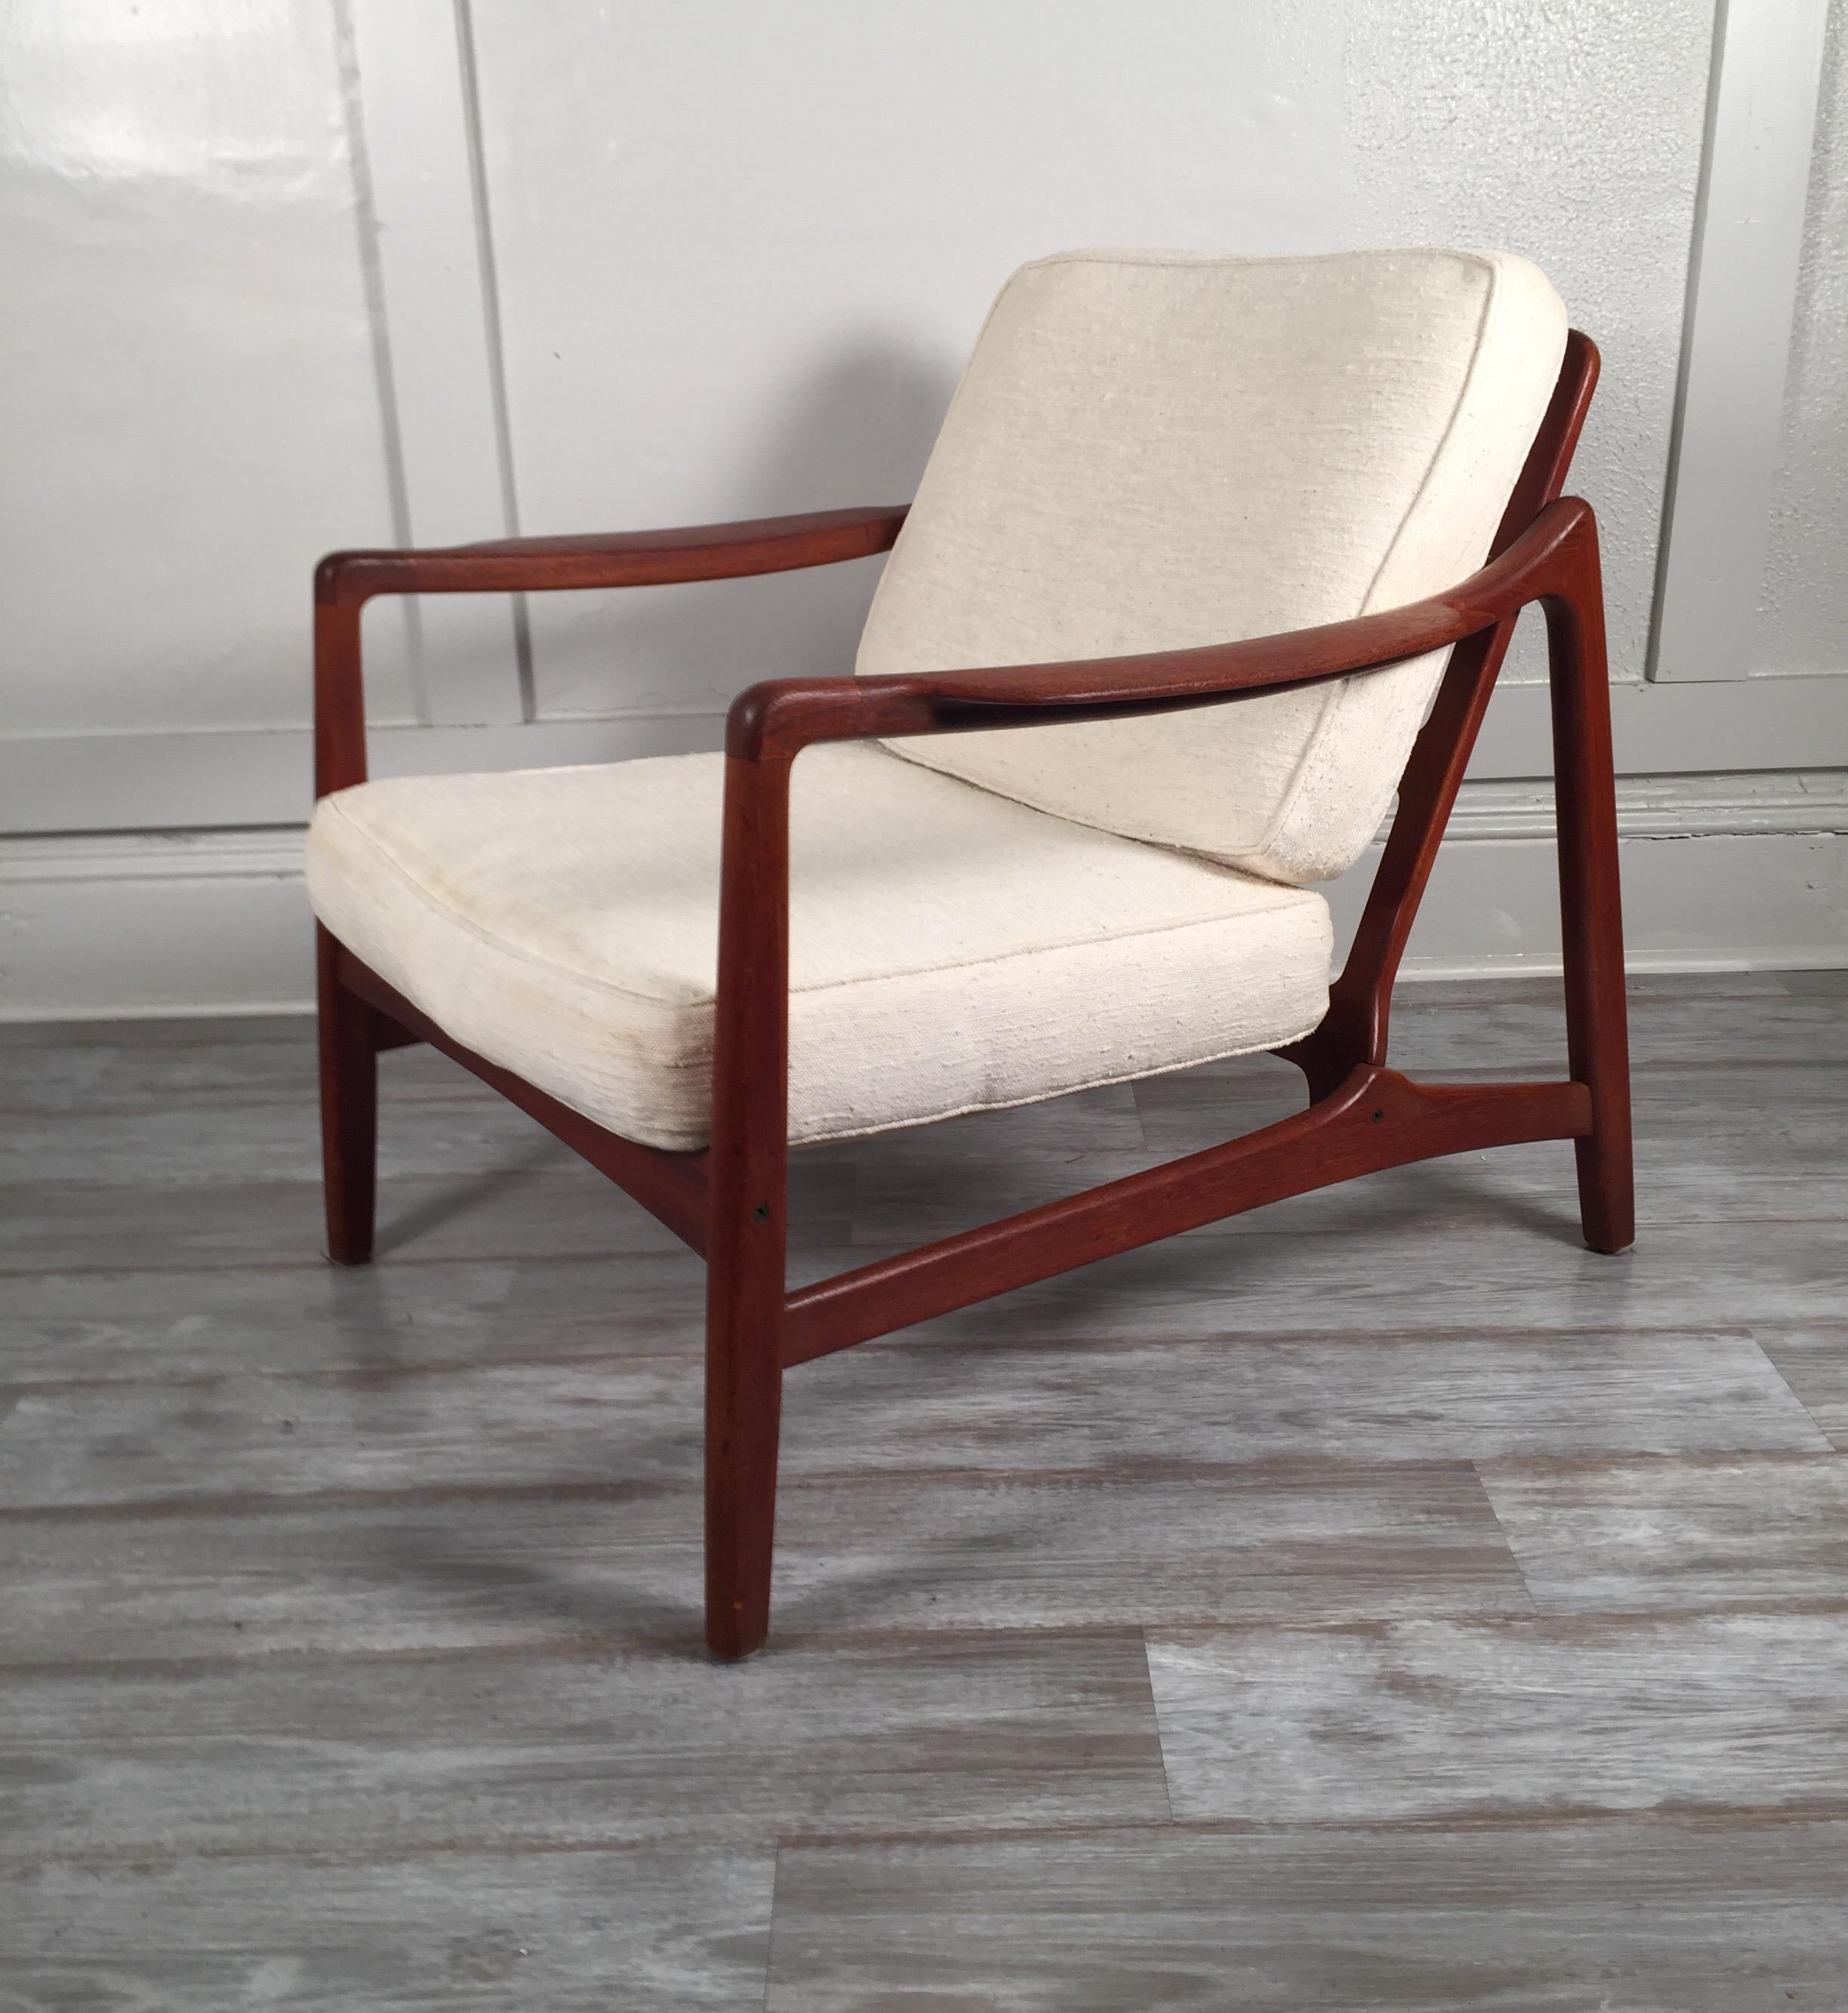 Scandinavian Modern Lounge Chair by Tove and Edvard Kindt-Larsen